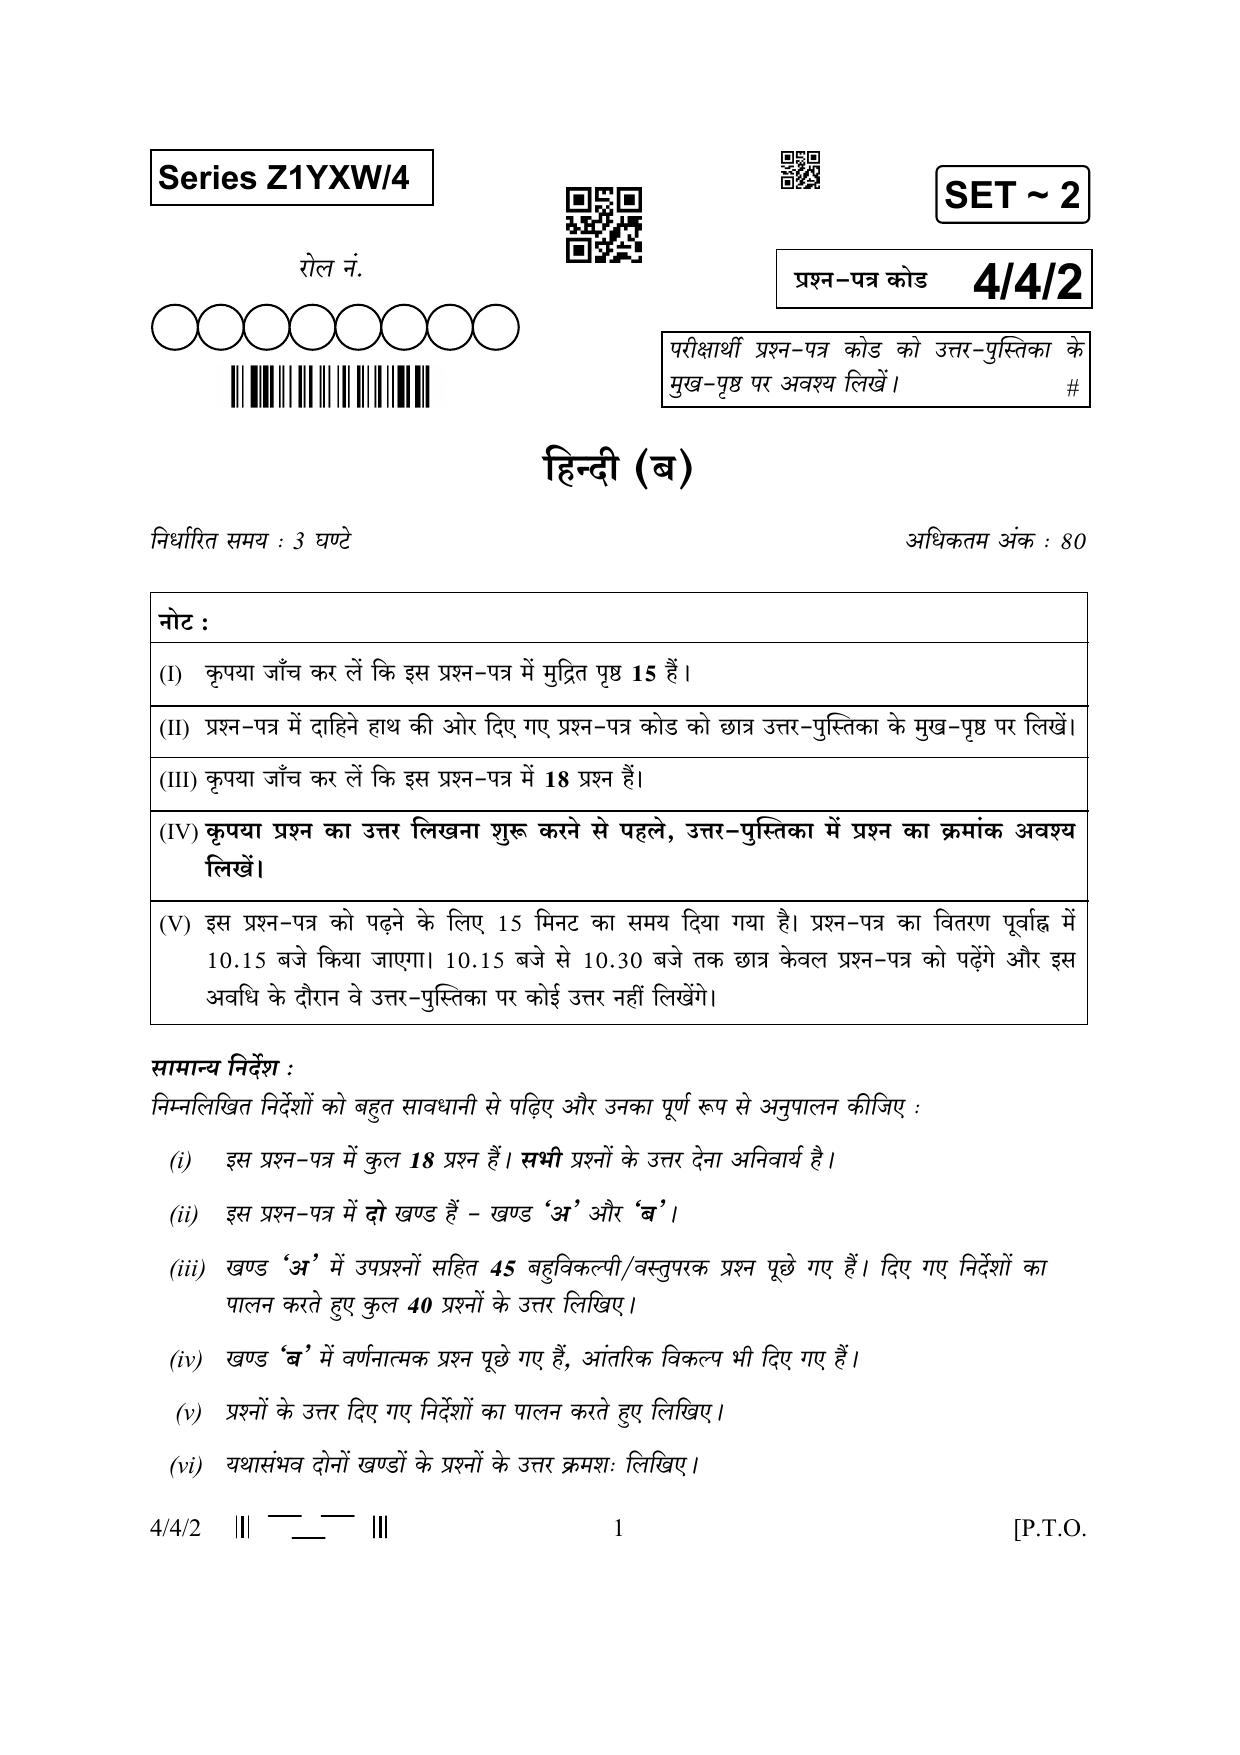 CBSE Class 10 4-4-2 Hindi B 2023 Question Paper - Page 1